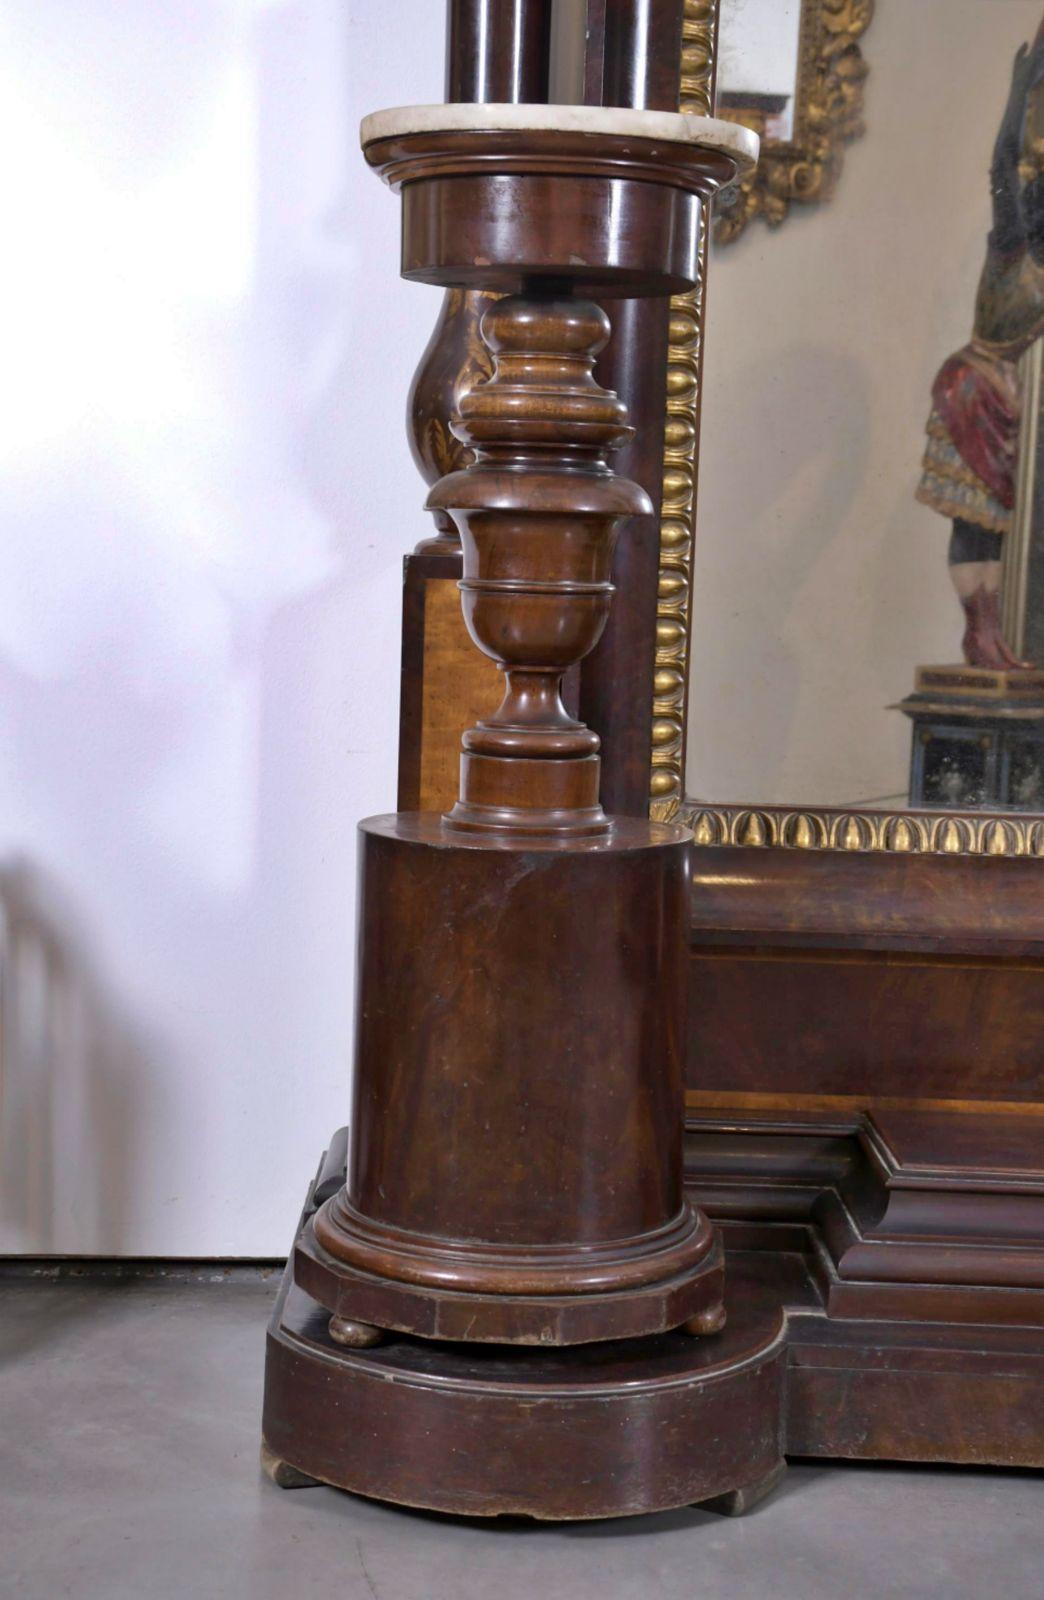 SPANISH TREMÓ REGENCY
MARIA CRISTINA WITH PAIR OF BASES, CIRCA 1840 19th Century

With a crest topped with a golden carving with an allegorical motif of the birth of Venus.
In mahogany wood, carved, turned and gilded. With two mahogany wood bases